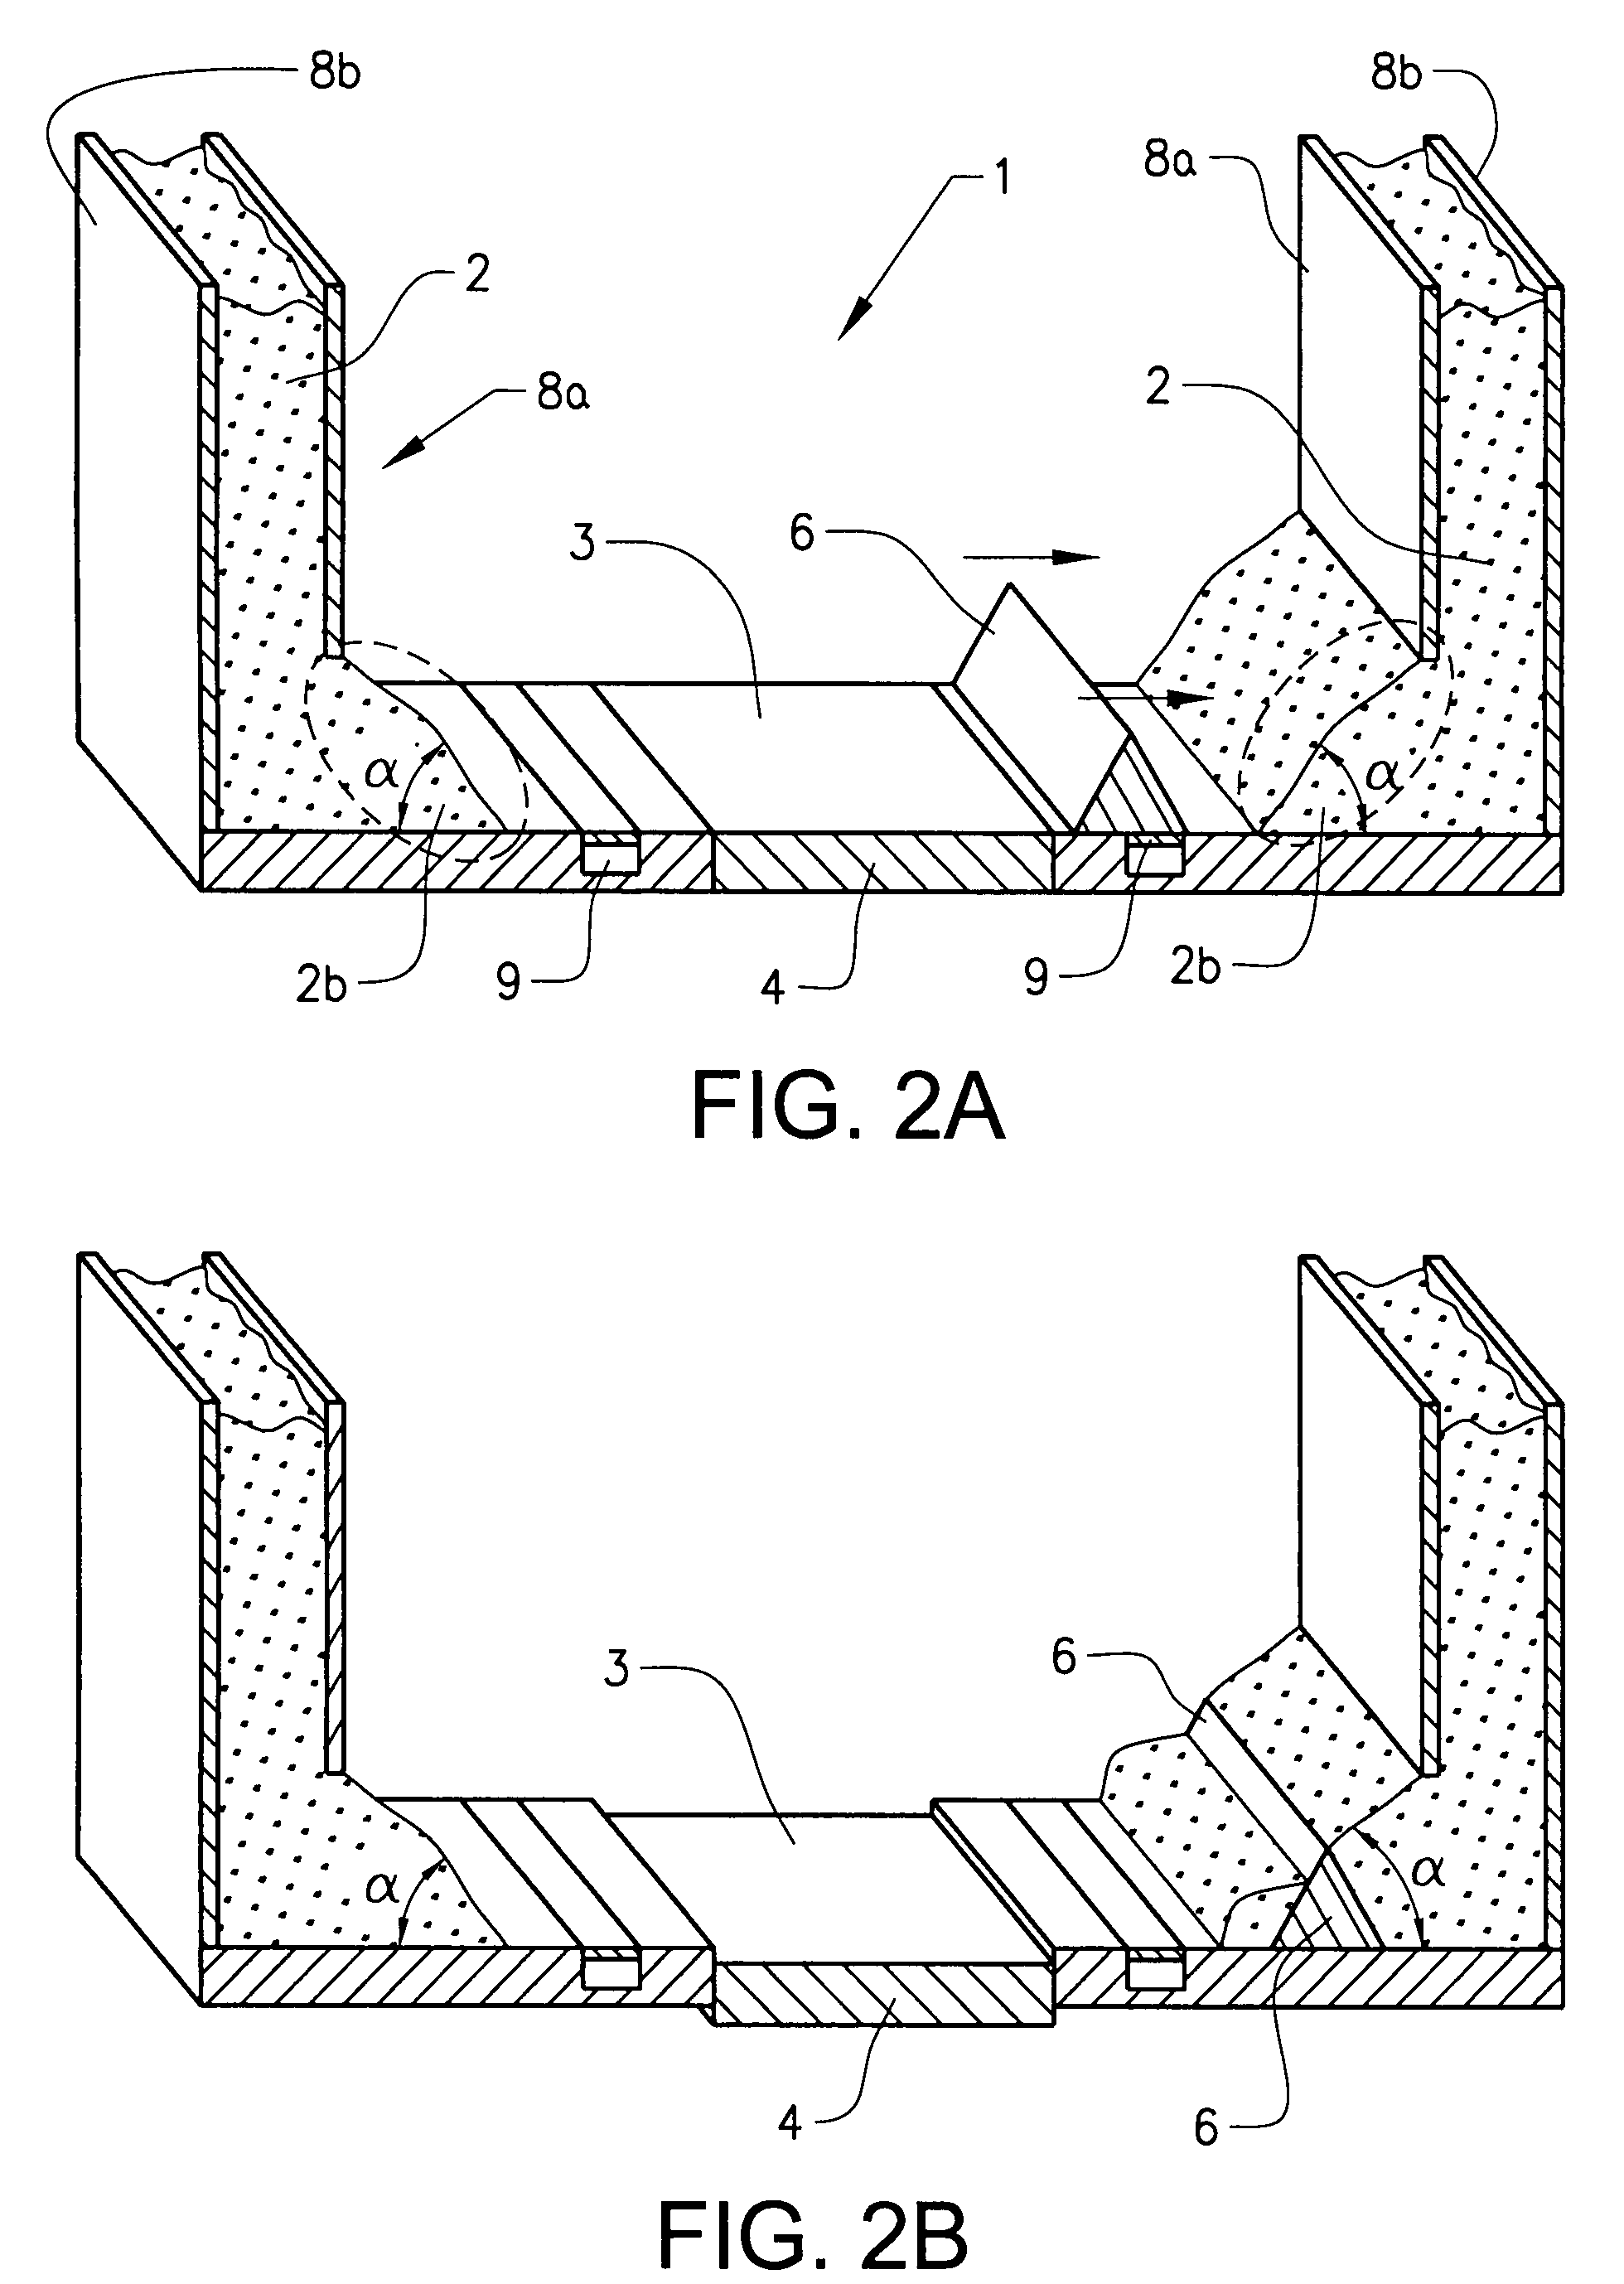 Systems, apparatus, and methods to feed and distribute powder used to produce three-dimensional objects